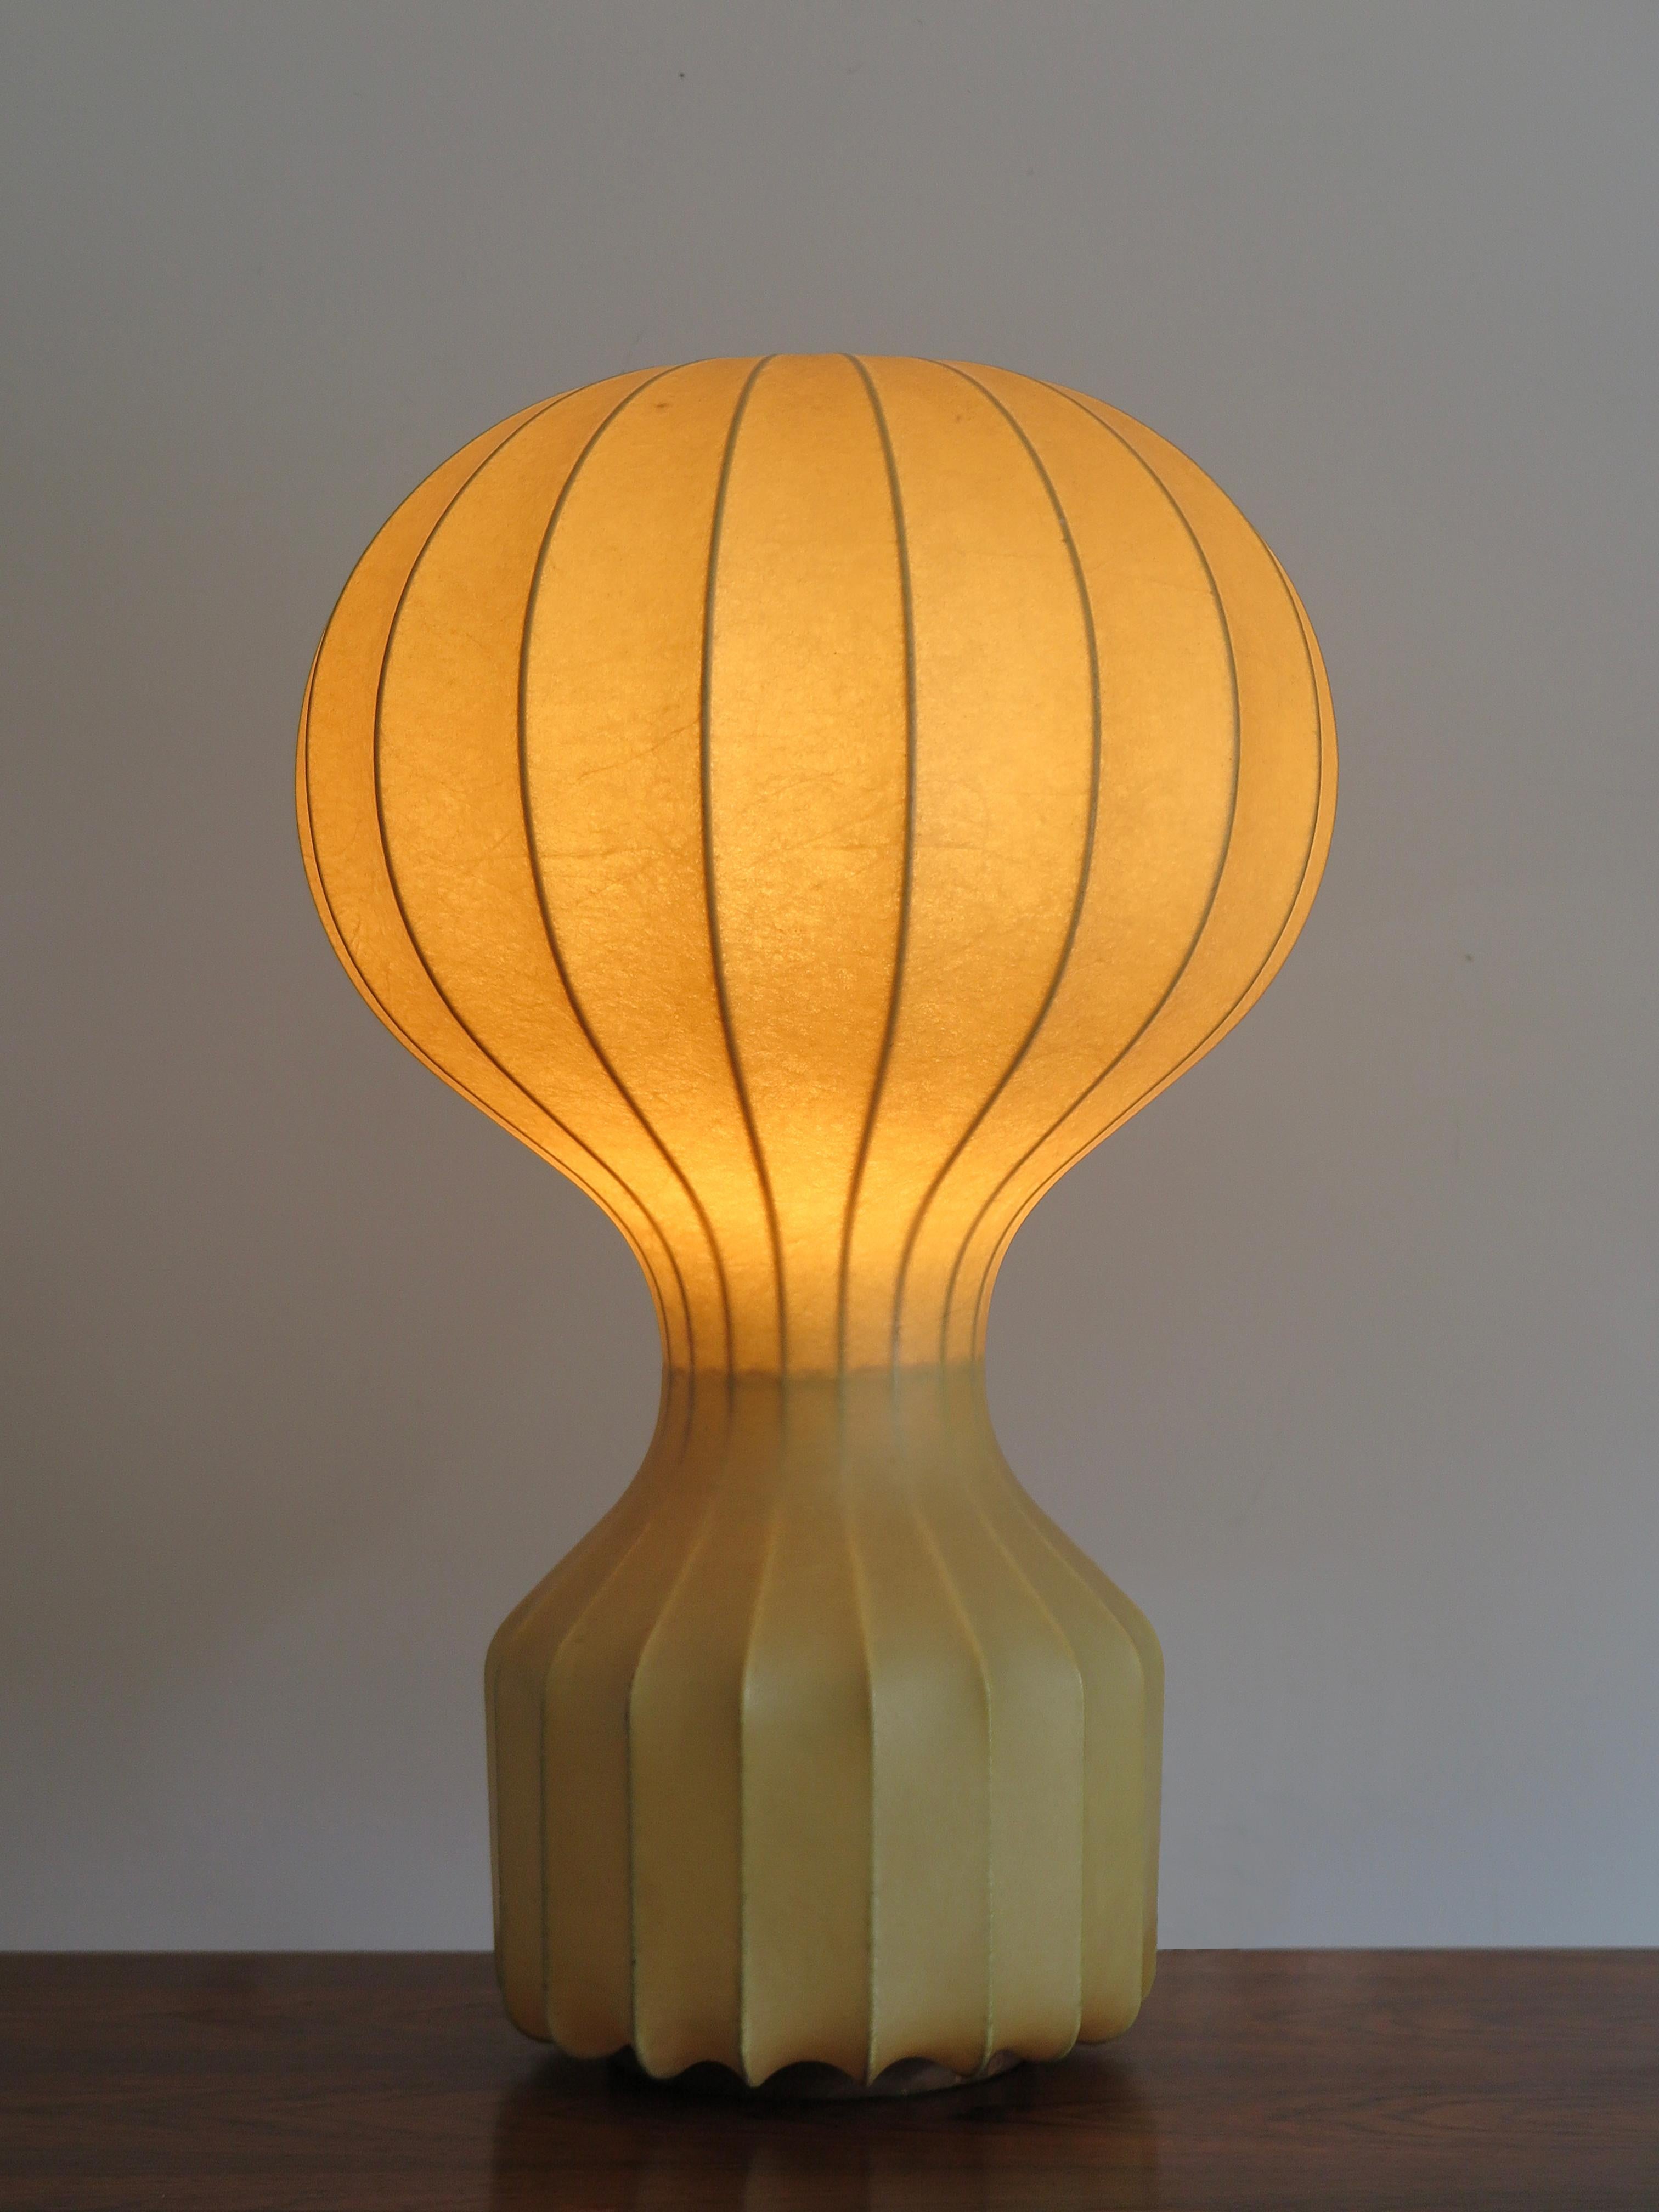 A Italian Mid-Century Modern table lamp ‘Gatto’ model designed by Achille & Pier Giacomo Castigioni for Flos in 1962.
Internal structure in iron rod covered in “cocoon” resin sprayed on the structure.
Manufacturer’s adhesive label